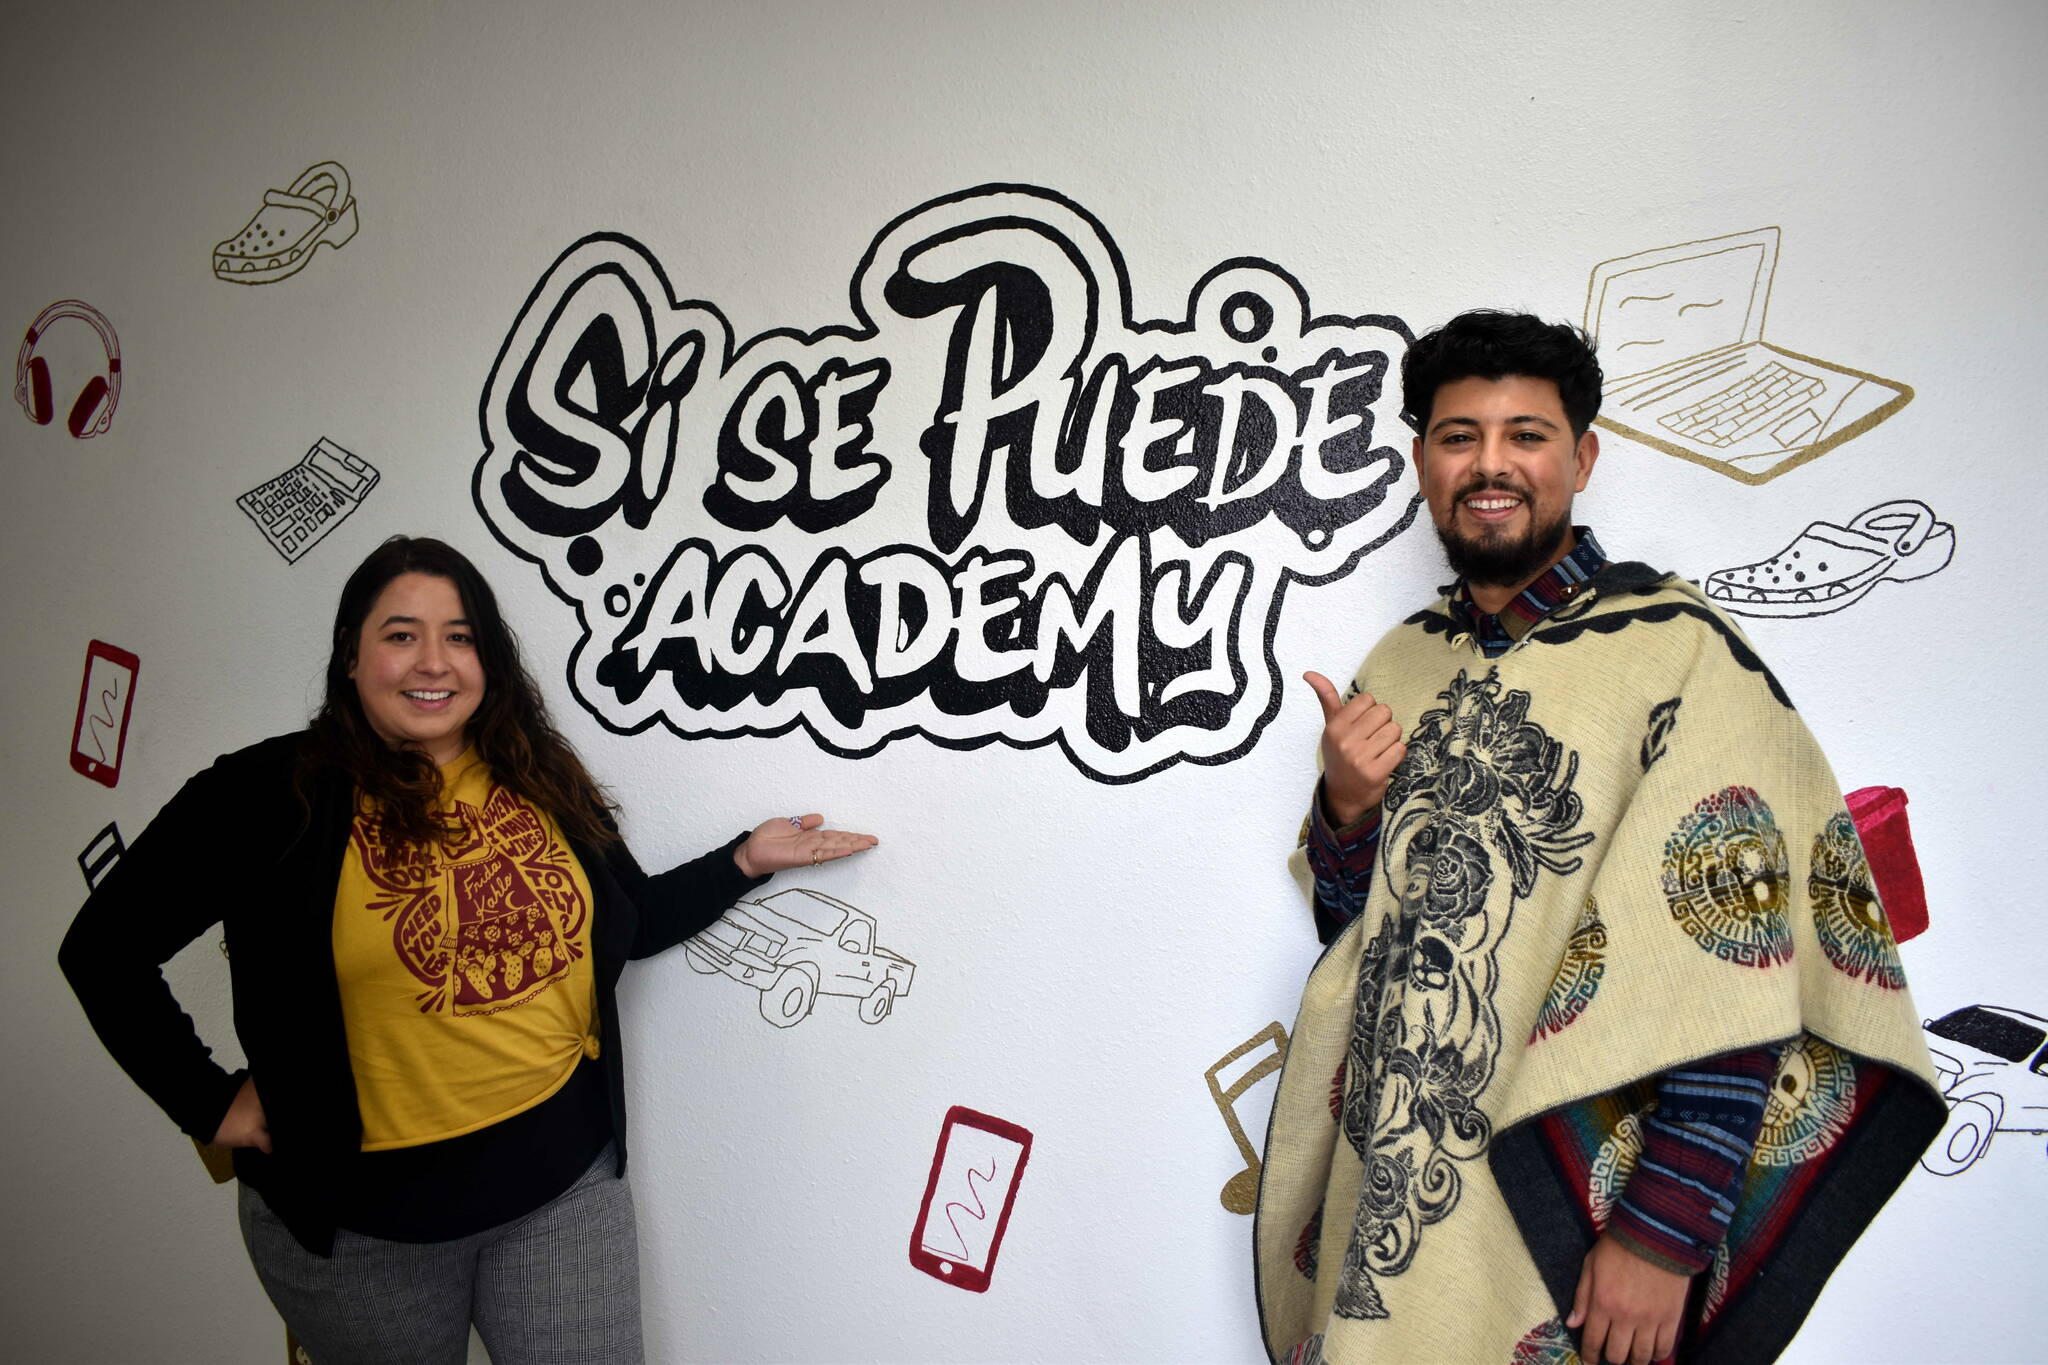 Photo by Alex Bruell/the Mirror
Sí se Puede Program Manager Elsa Alvarado and student support advocate Emmanuel Lopez pose for a picture by the entrance of the program’s new home near where 16th Avenue South meets Highway 99 in Federal Way. Sí se Puede is operated by El Centro de la Raza and aims to help young people get their GED and on track toward meaningful careers.